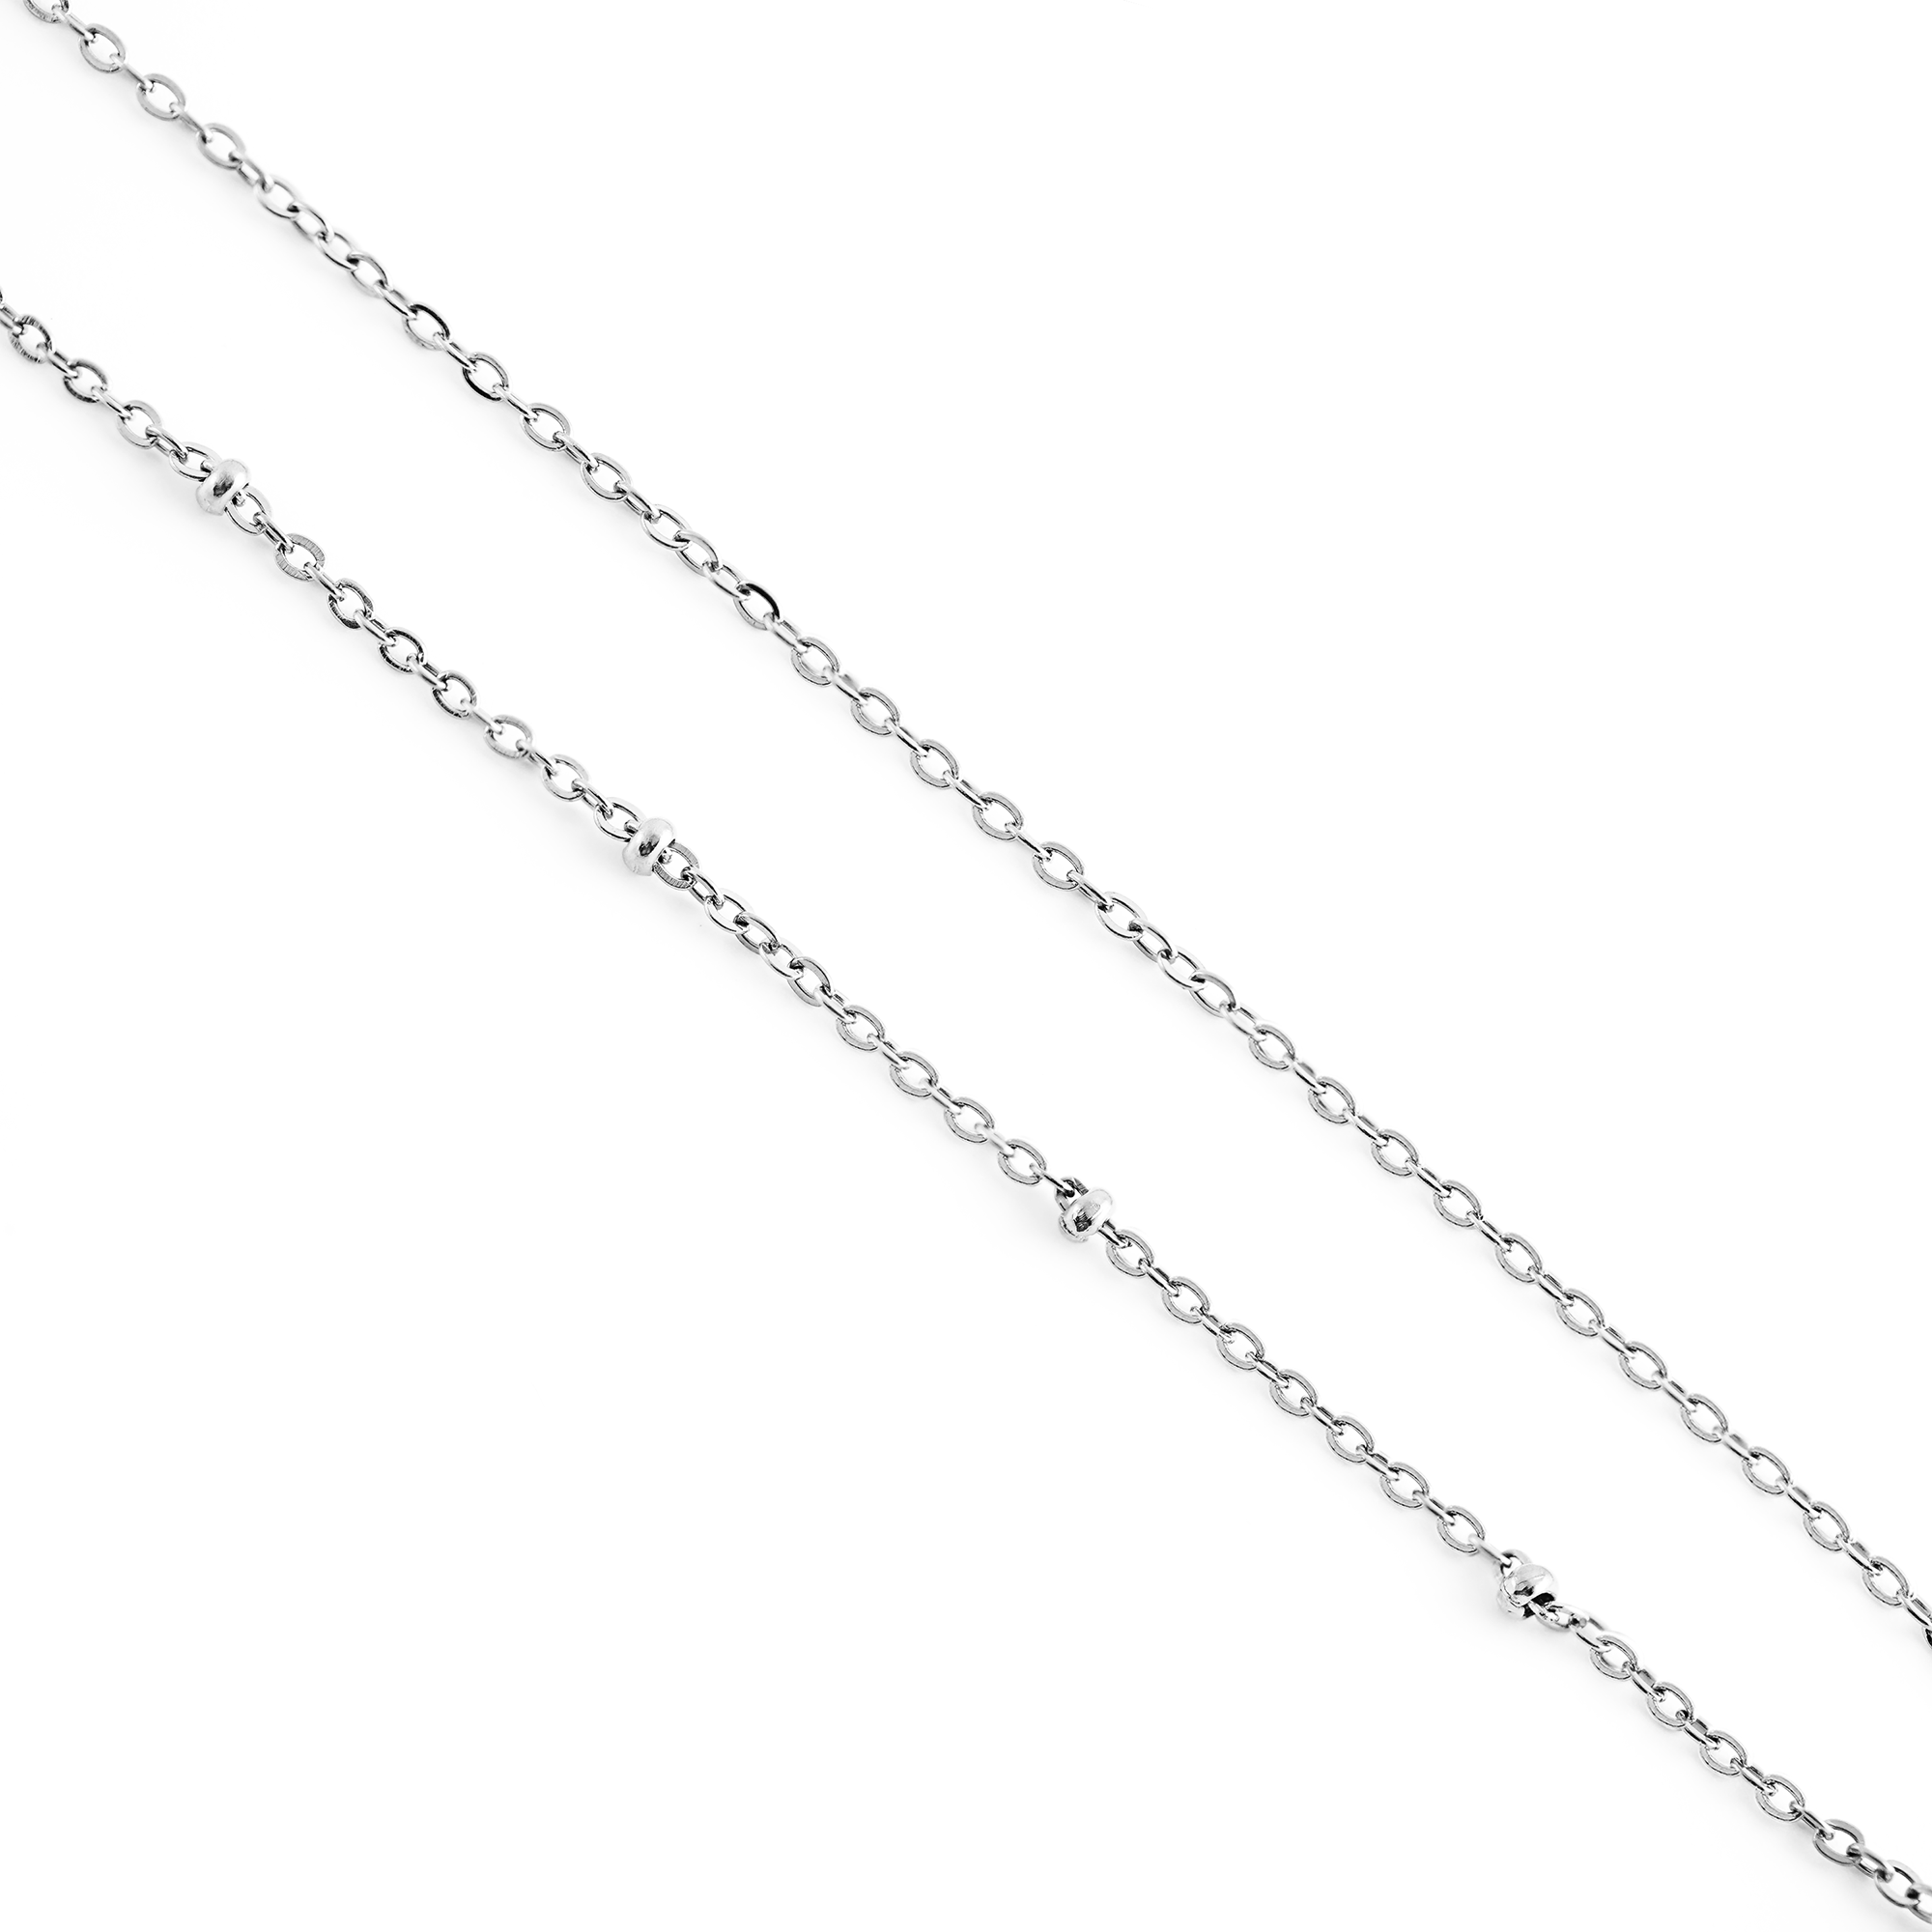 Tavira women's waist chain by Five Jwlry, featuring two layered chains: the first is a thin cable chain and the second is a thin cable chain adorned with a row of beads. Adjustable in size from 68cm to 86cm, in silver-colored, water-resistant 316L stainless steel. Hypoallergenic with a 2-year warranty.